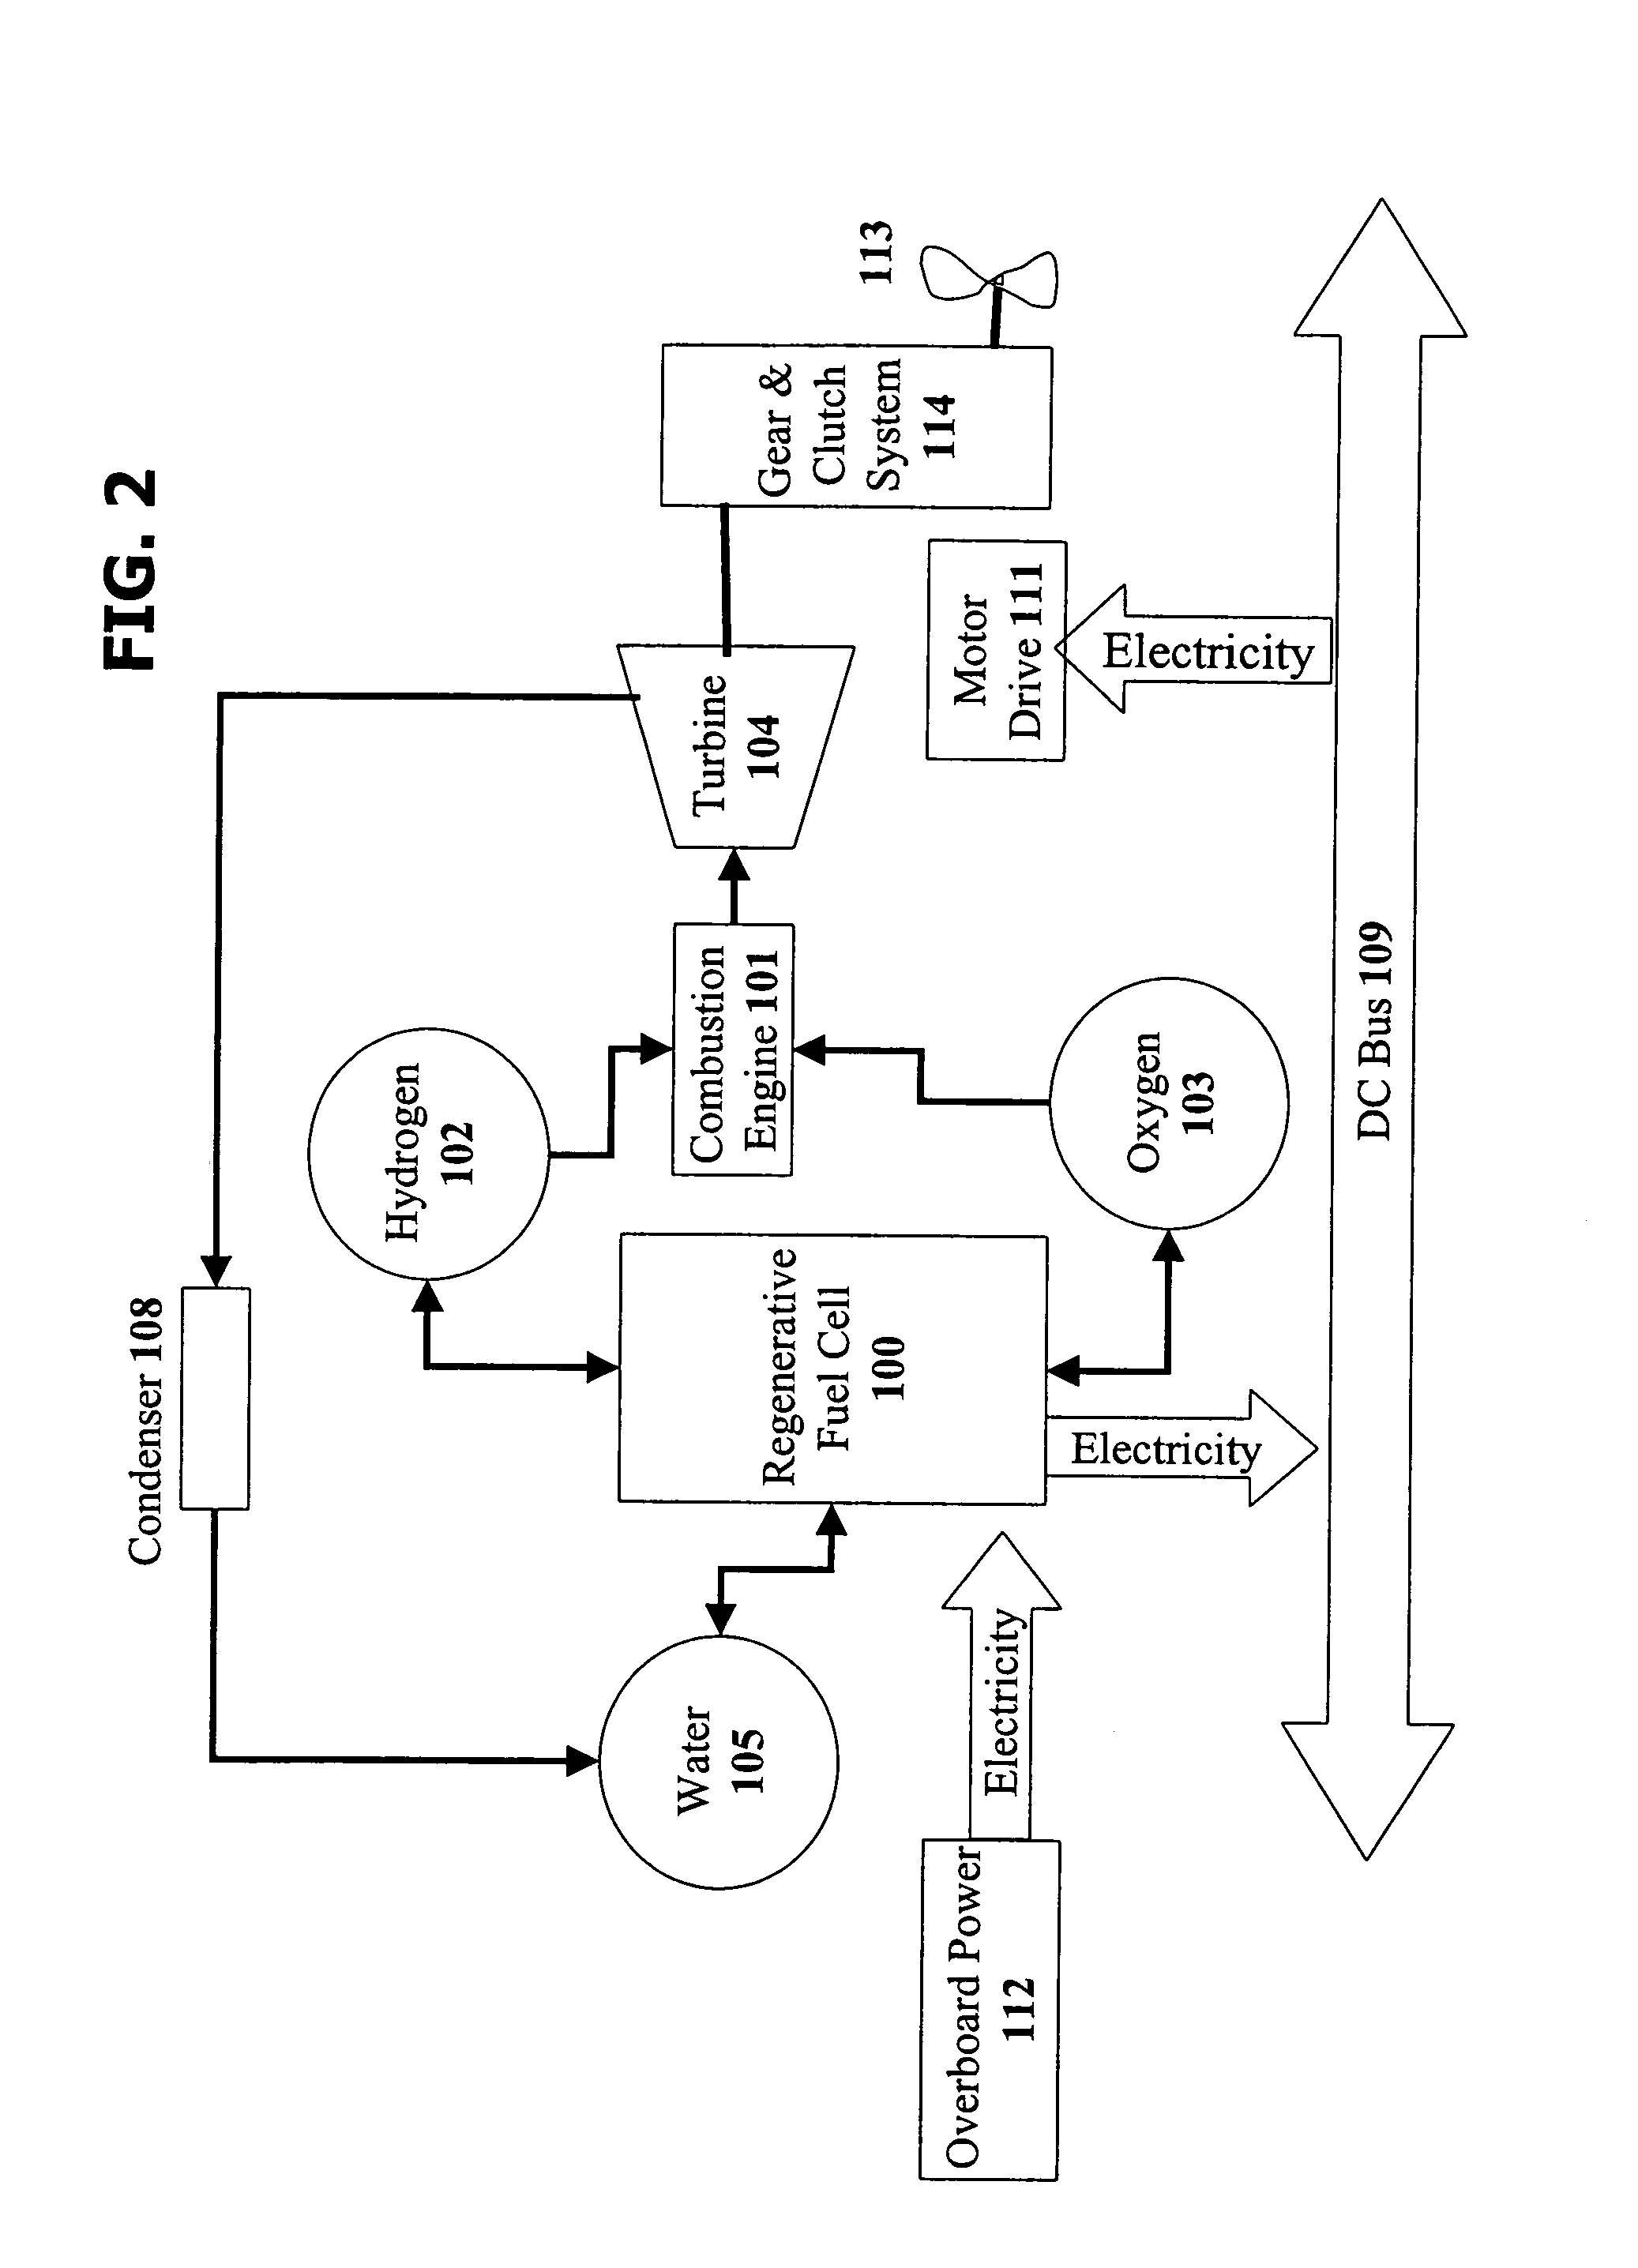 Power generation system using a combustion system and a fuel cell